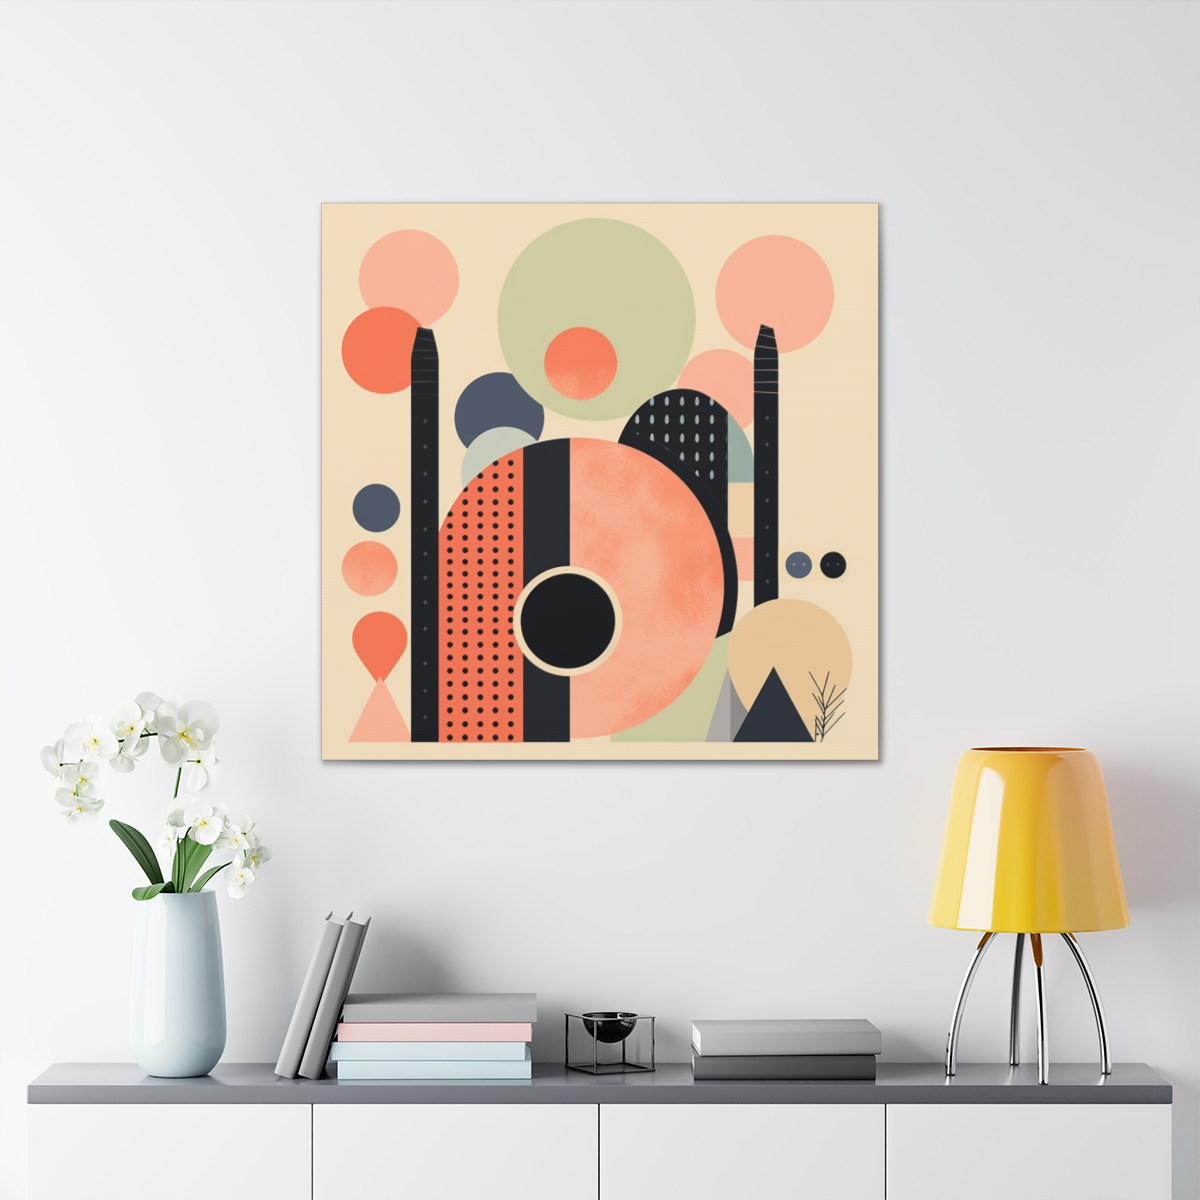 Minimalist Abstract Art: Cities After Cities